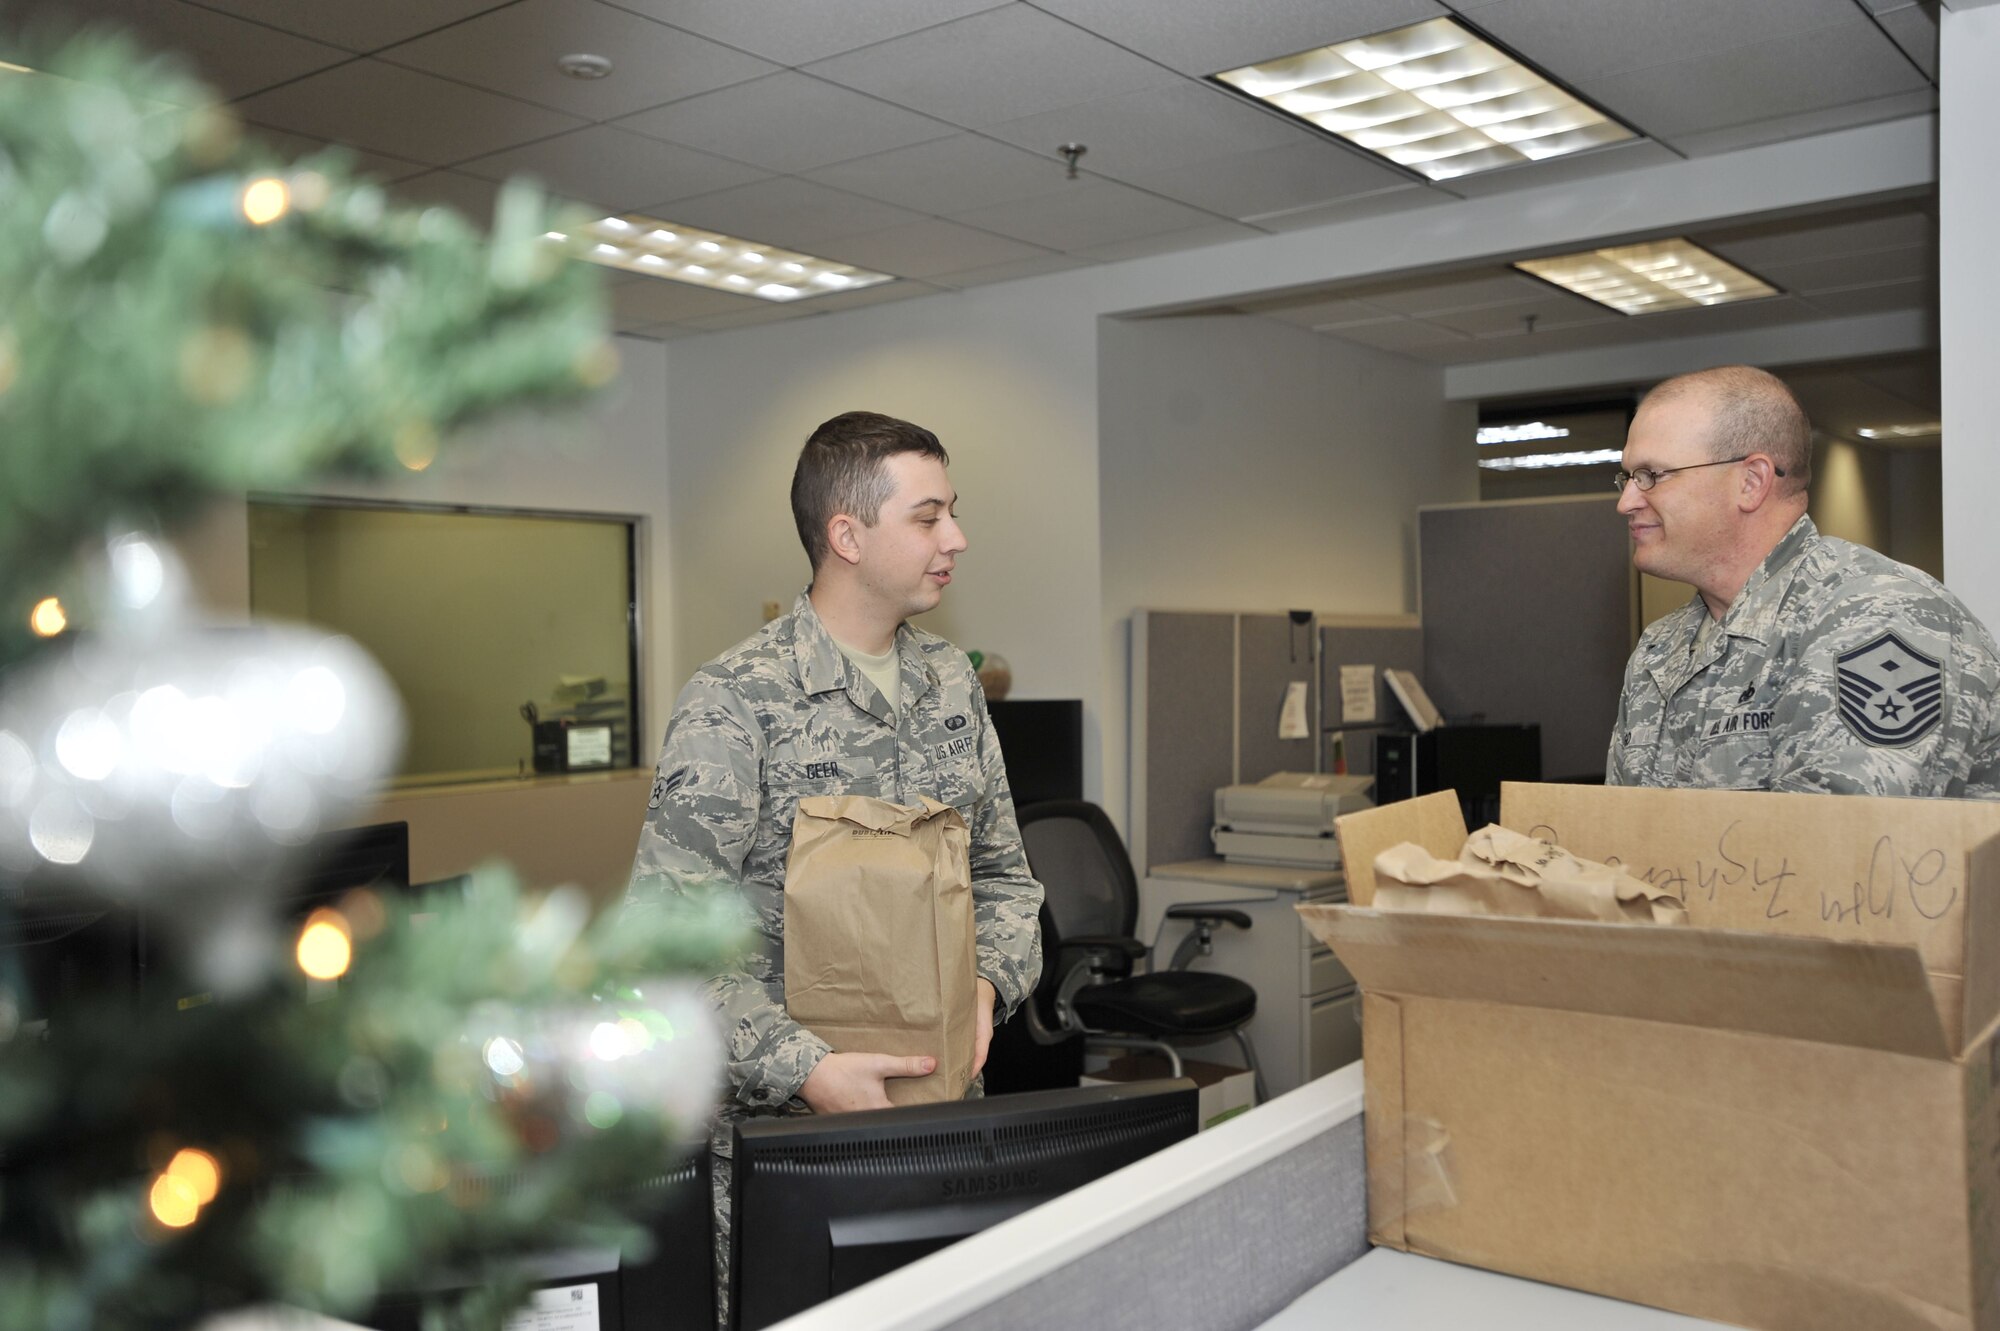 U.S. Air Force Airman 1st Class Nathan Greer, 20th Comptroller Squadron (CPTS) customer service representative, left, receives holiday cookies from Master Sgt. Raymond Lego, 20th CPTS first sergeant, at Shaw Air Force Base, S.C., Dec. 7, 2017.